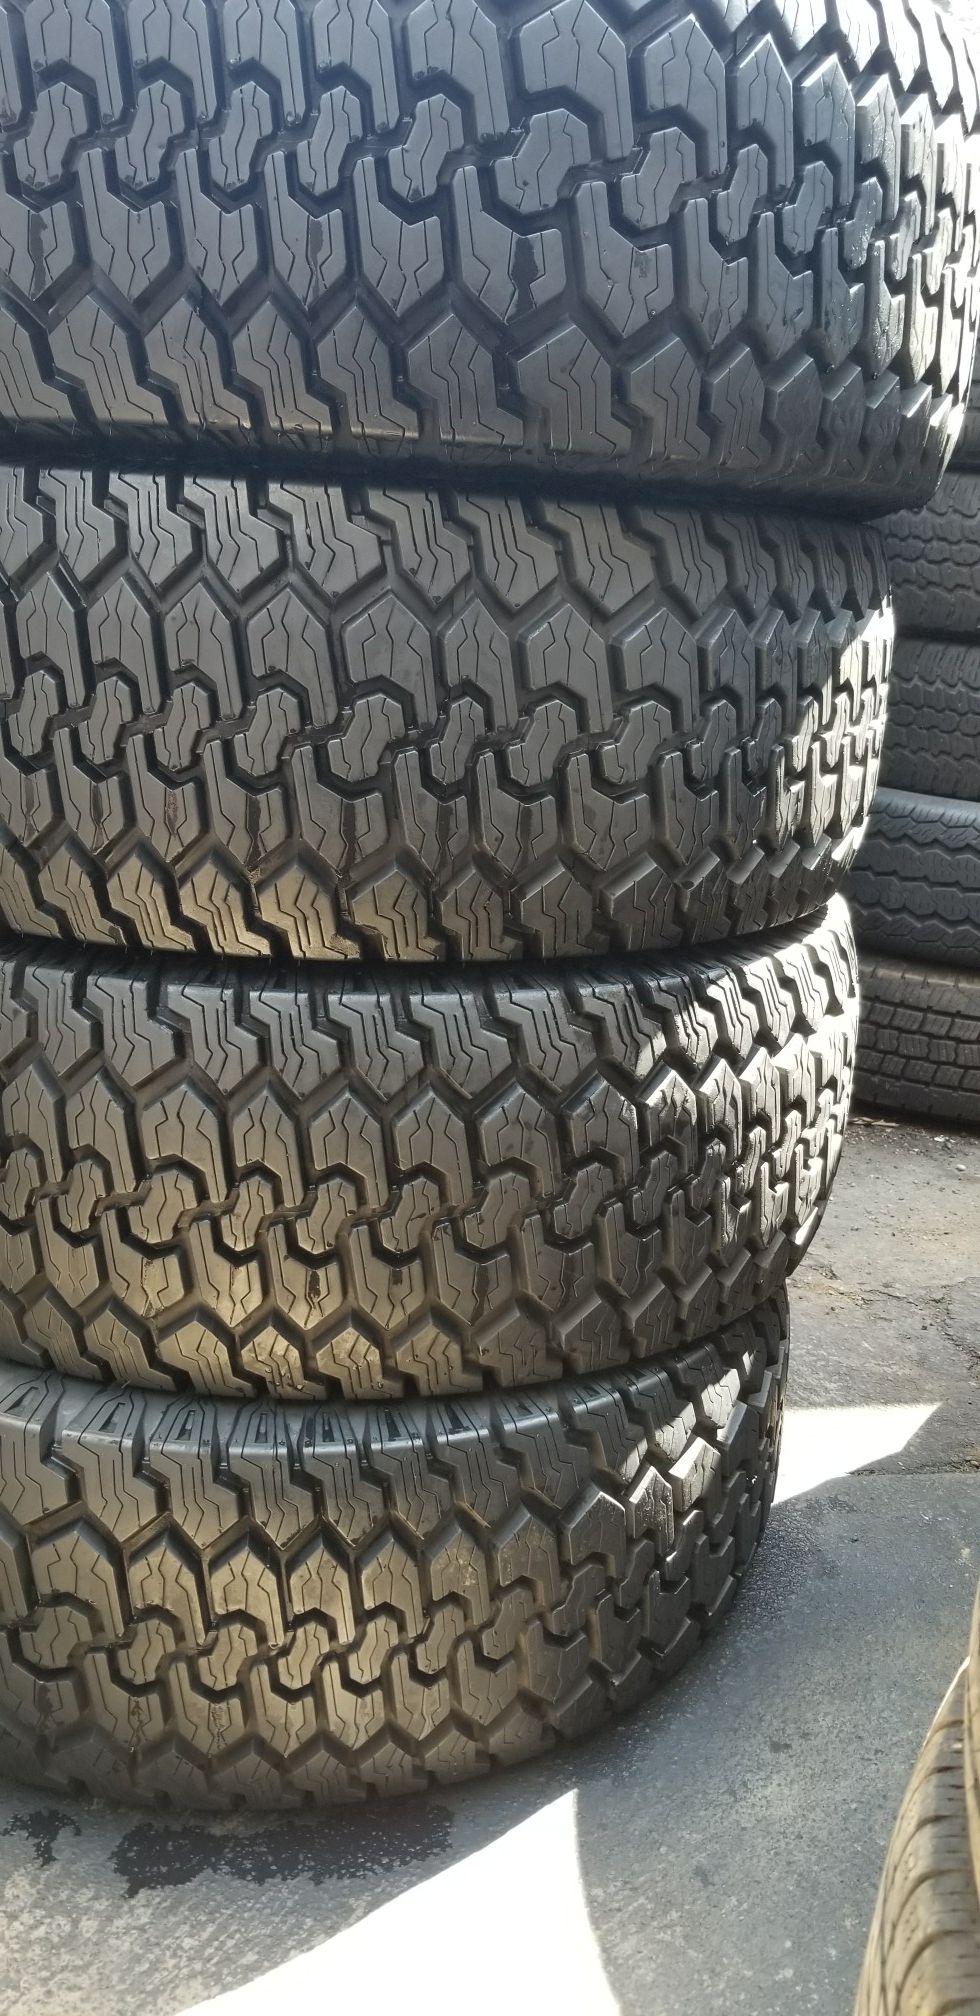 A set of 4 Definity Discovery tires 33×12.5 R15LT